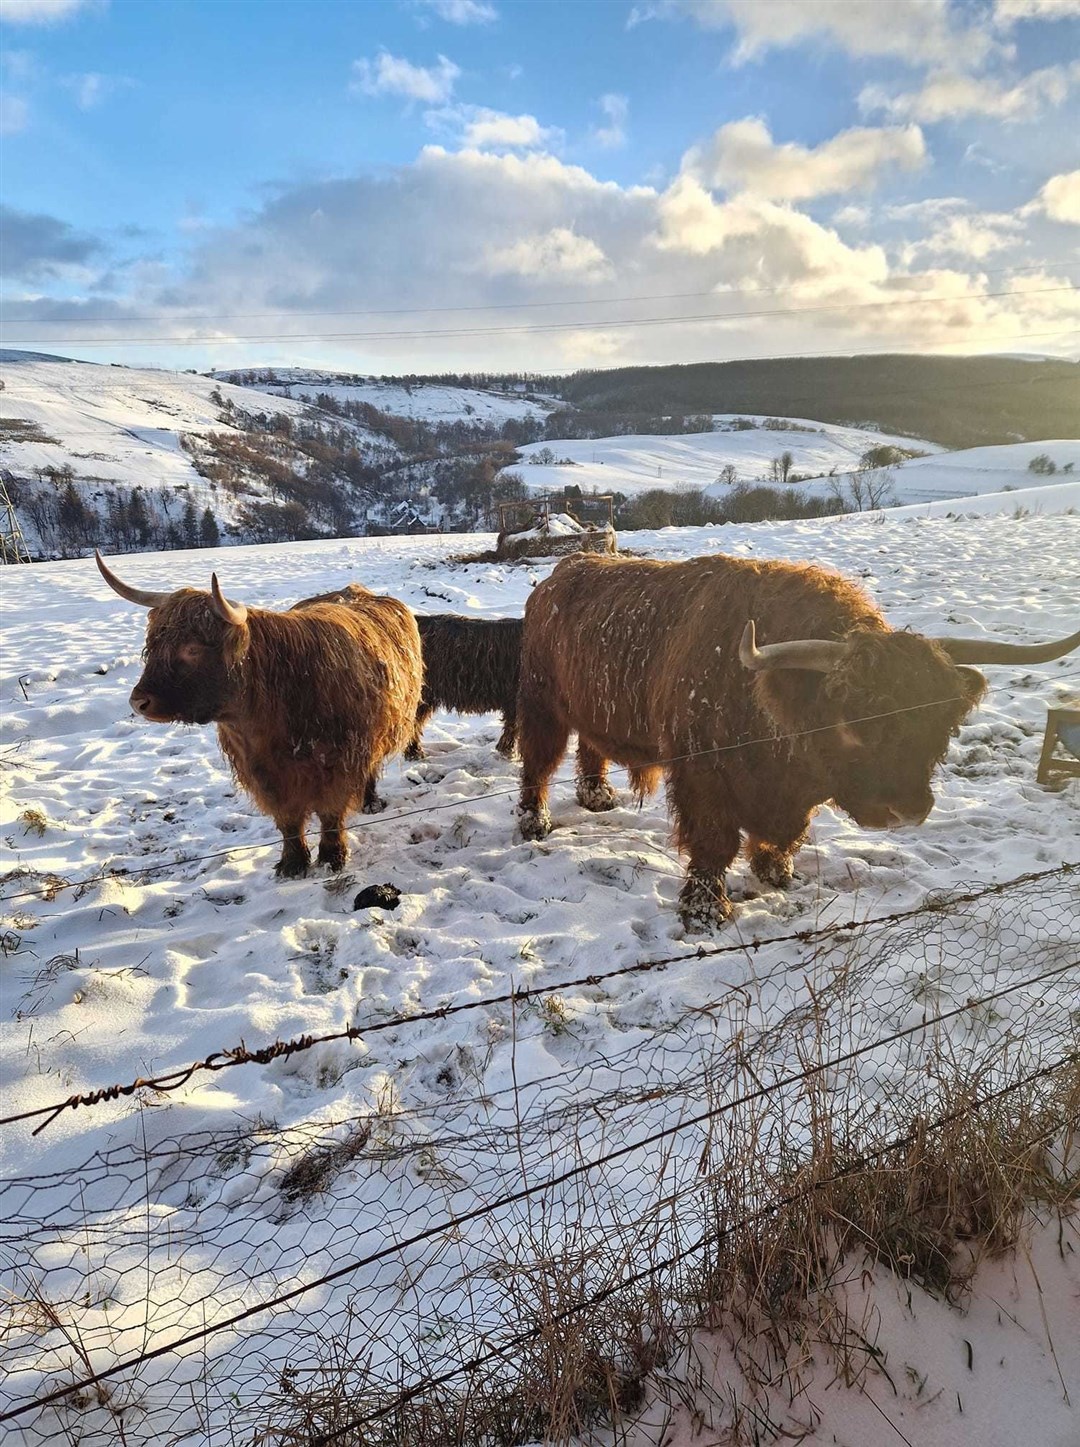 The Highland Cows in Dufftown were enjoying the chilly weather